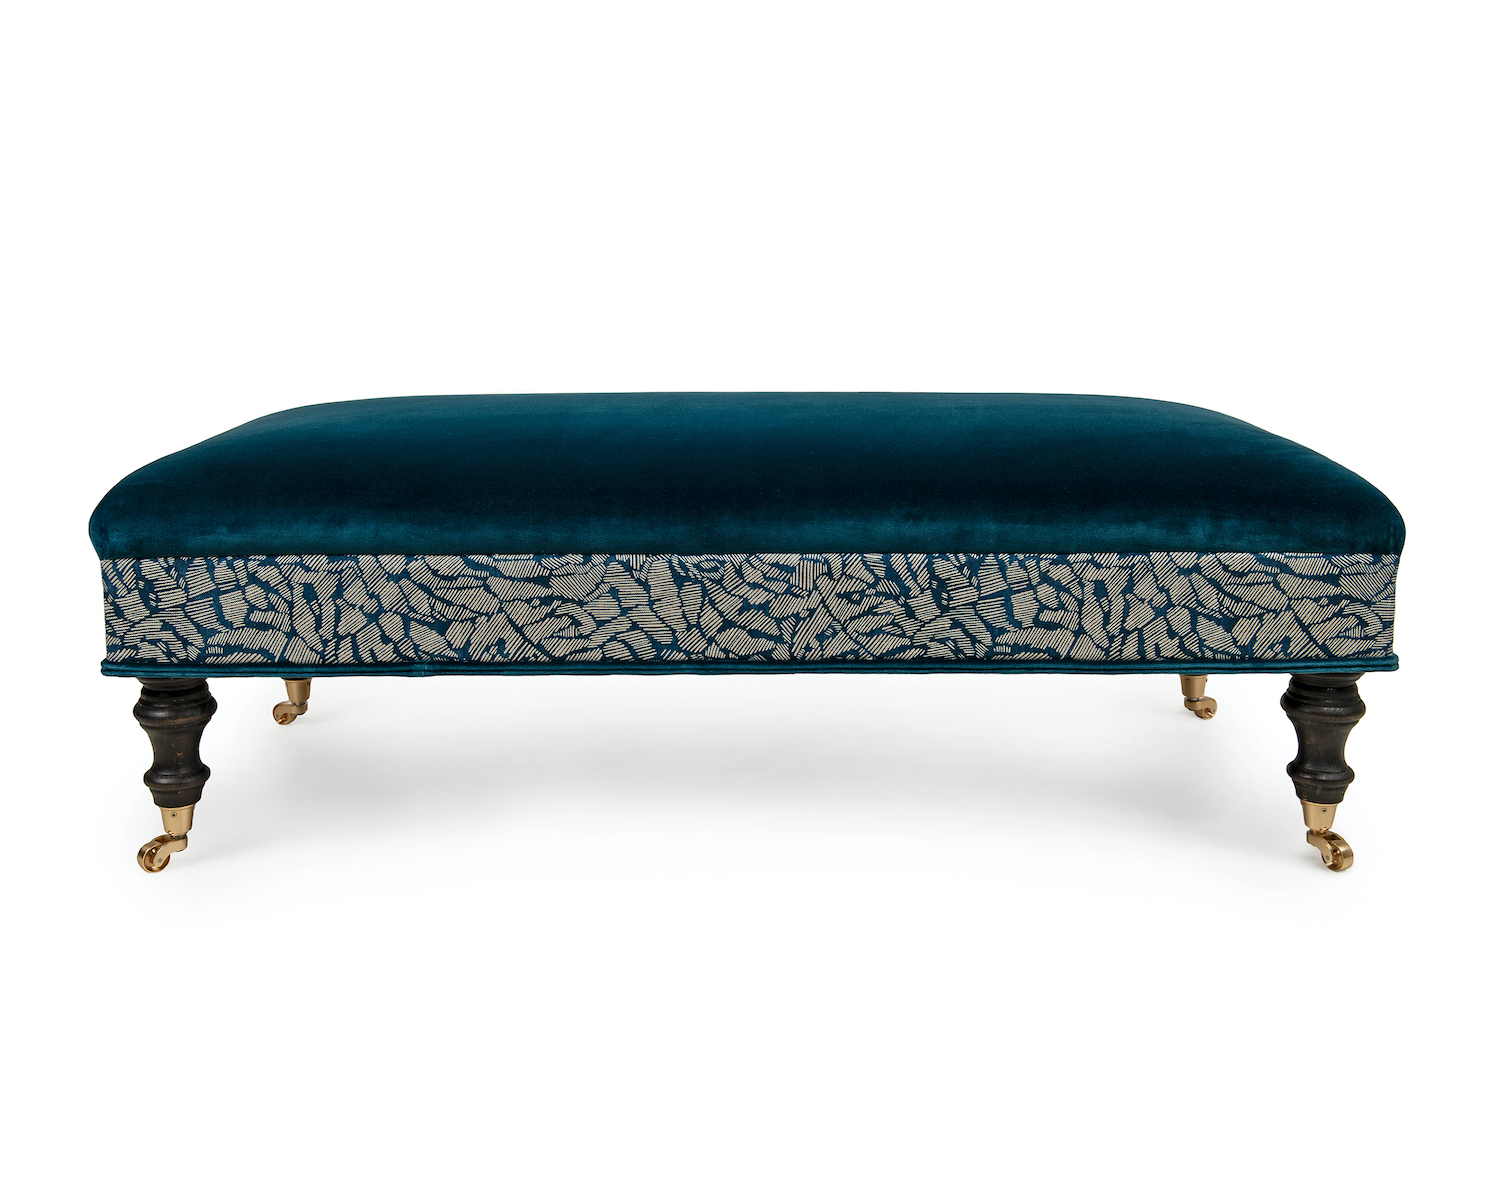 Velvet Footstool with Contrasting Border, Double Piping, and Turned Legs with Castors